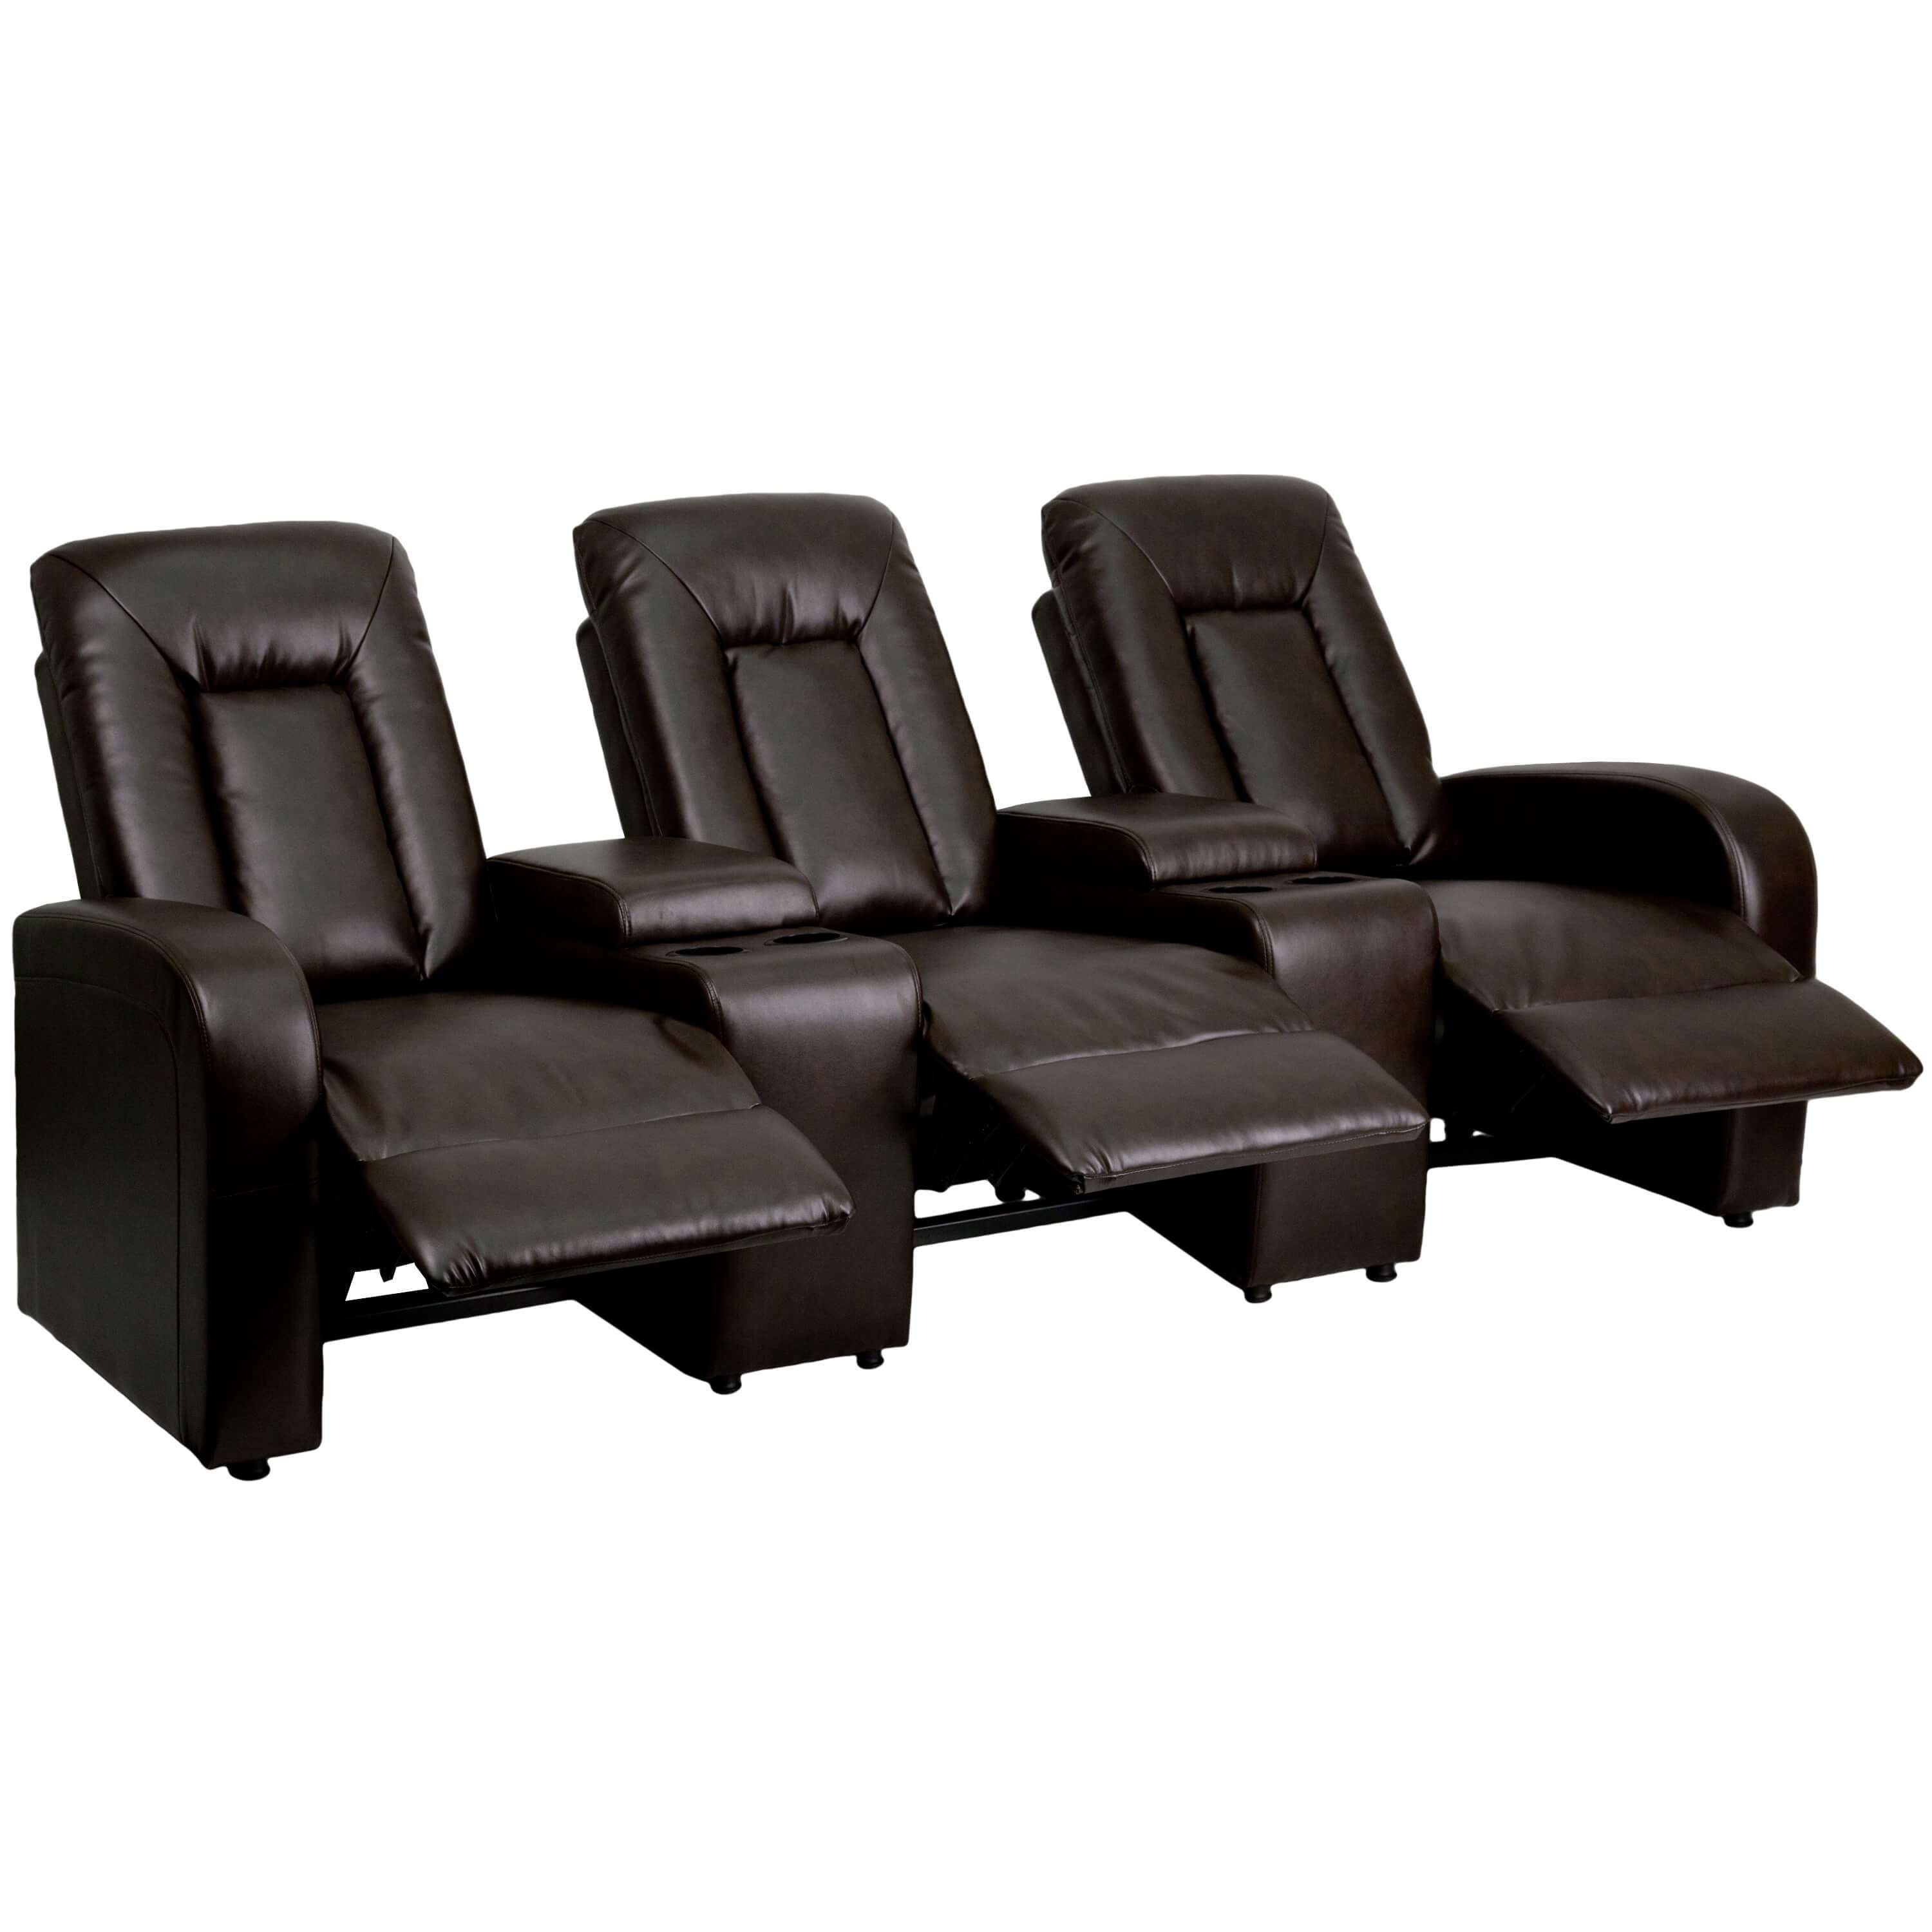 Leather home theater seating reclined view